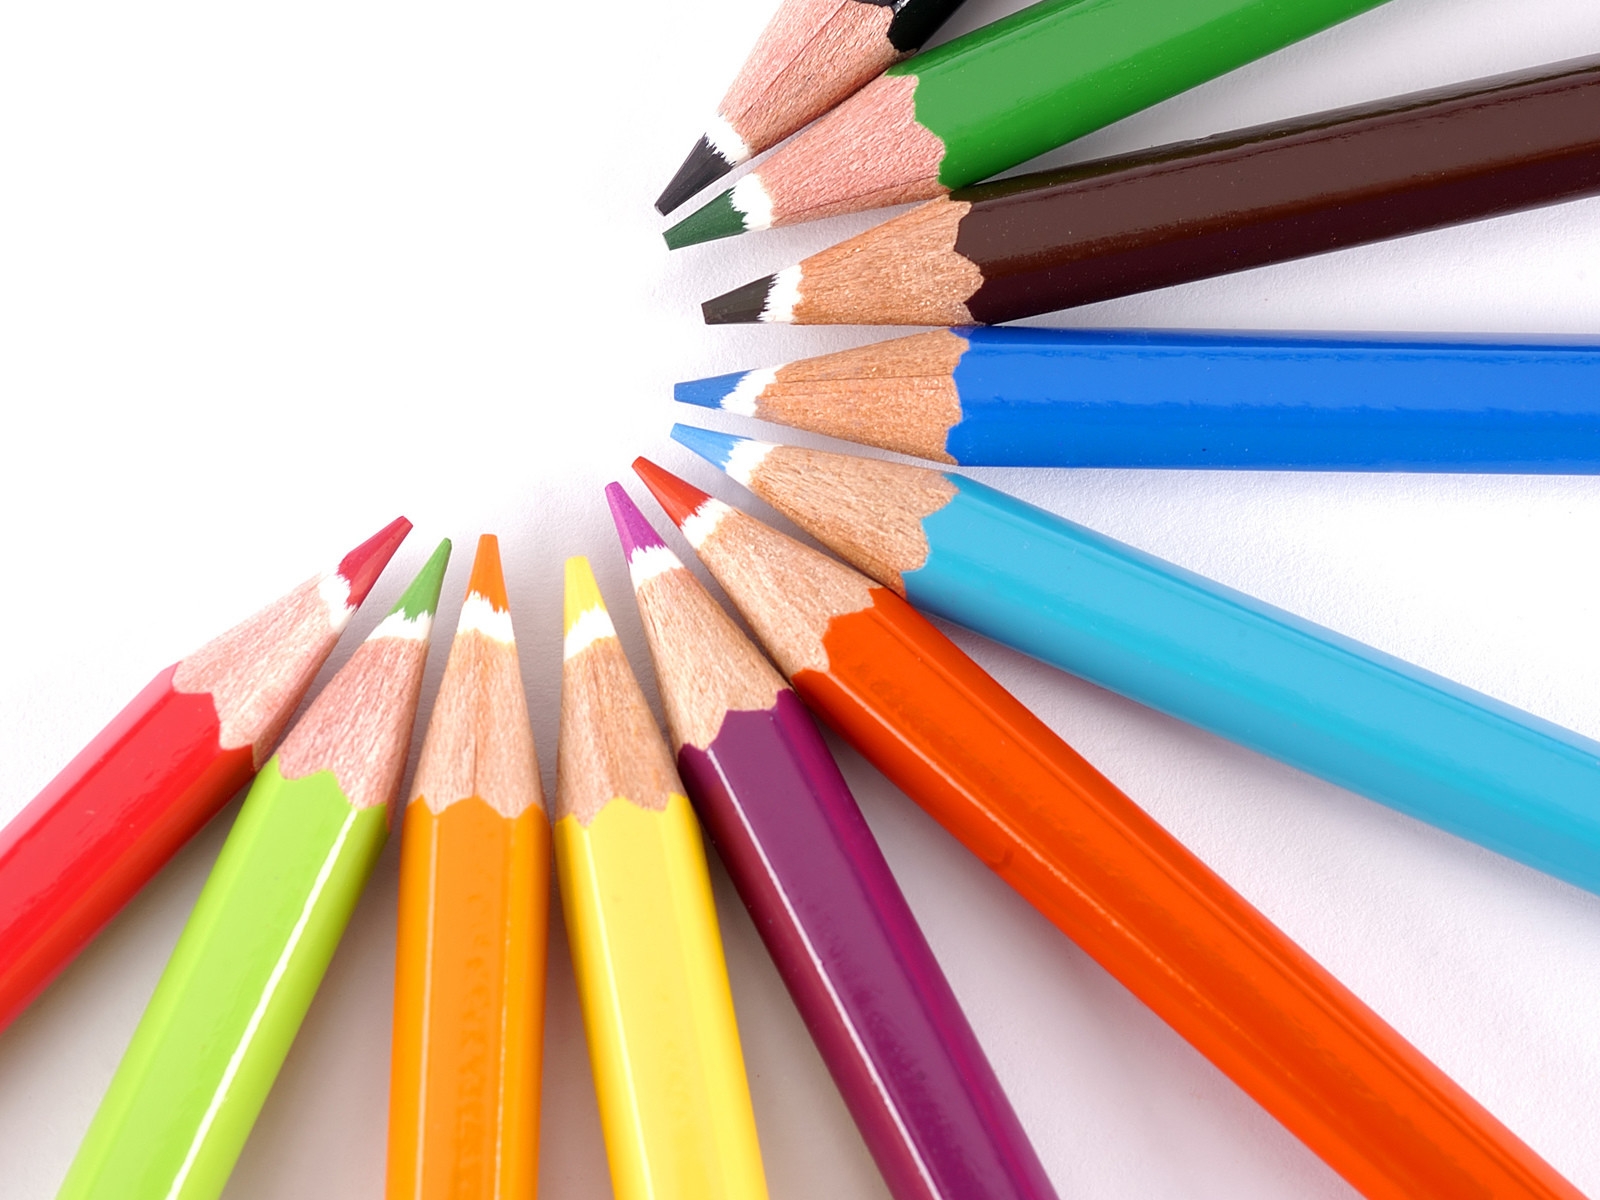 color pencil wallpaper,pencil,office supplies,writing implement,colorfulness